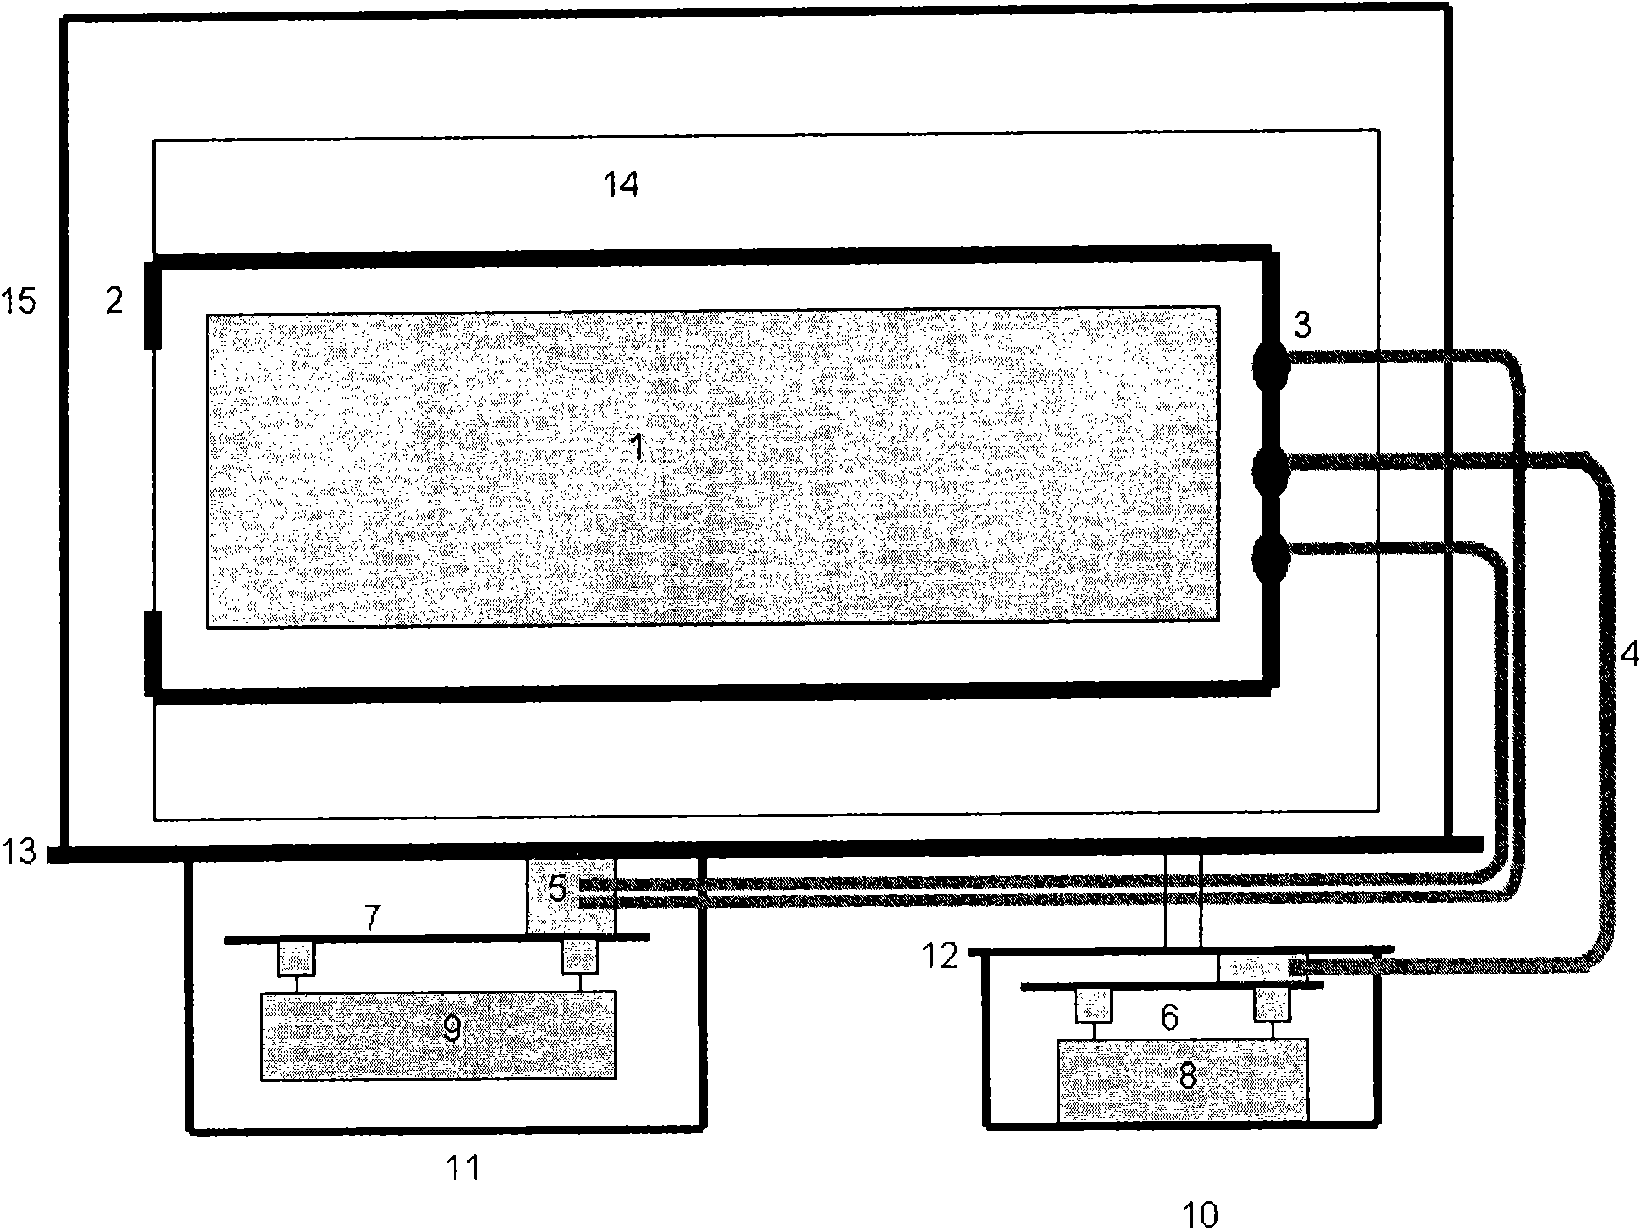 Migration tube module for ionic migration spectrometer